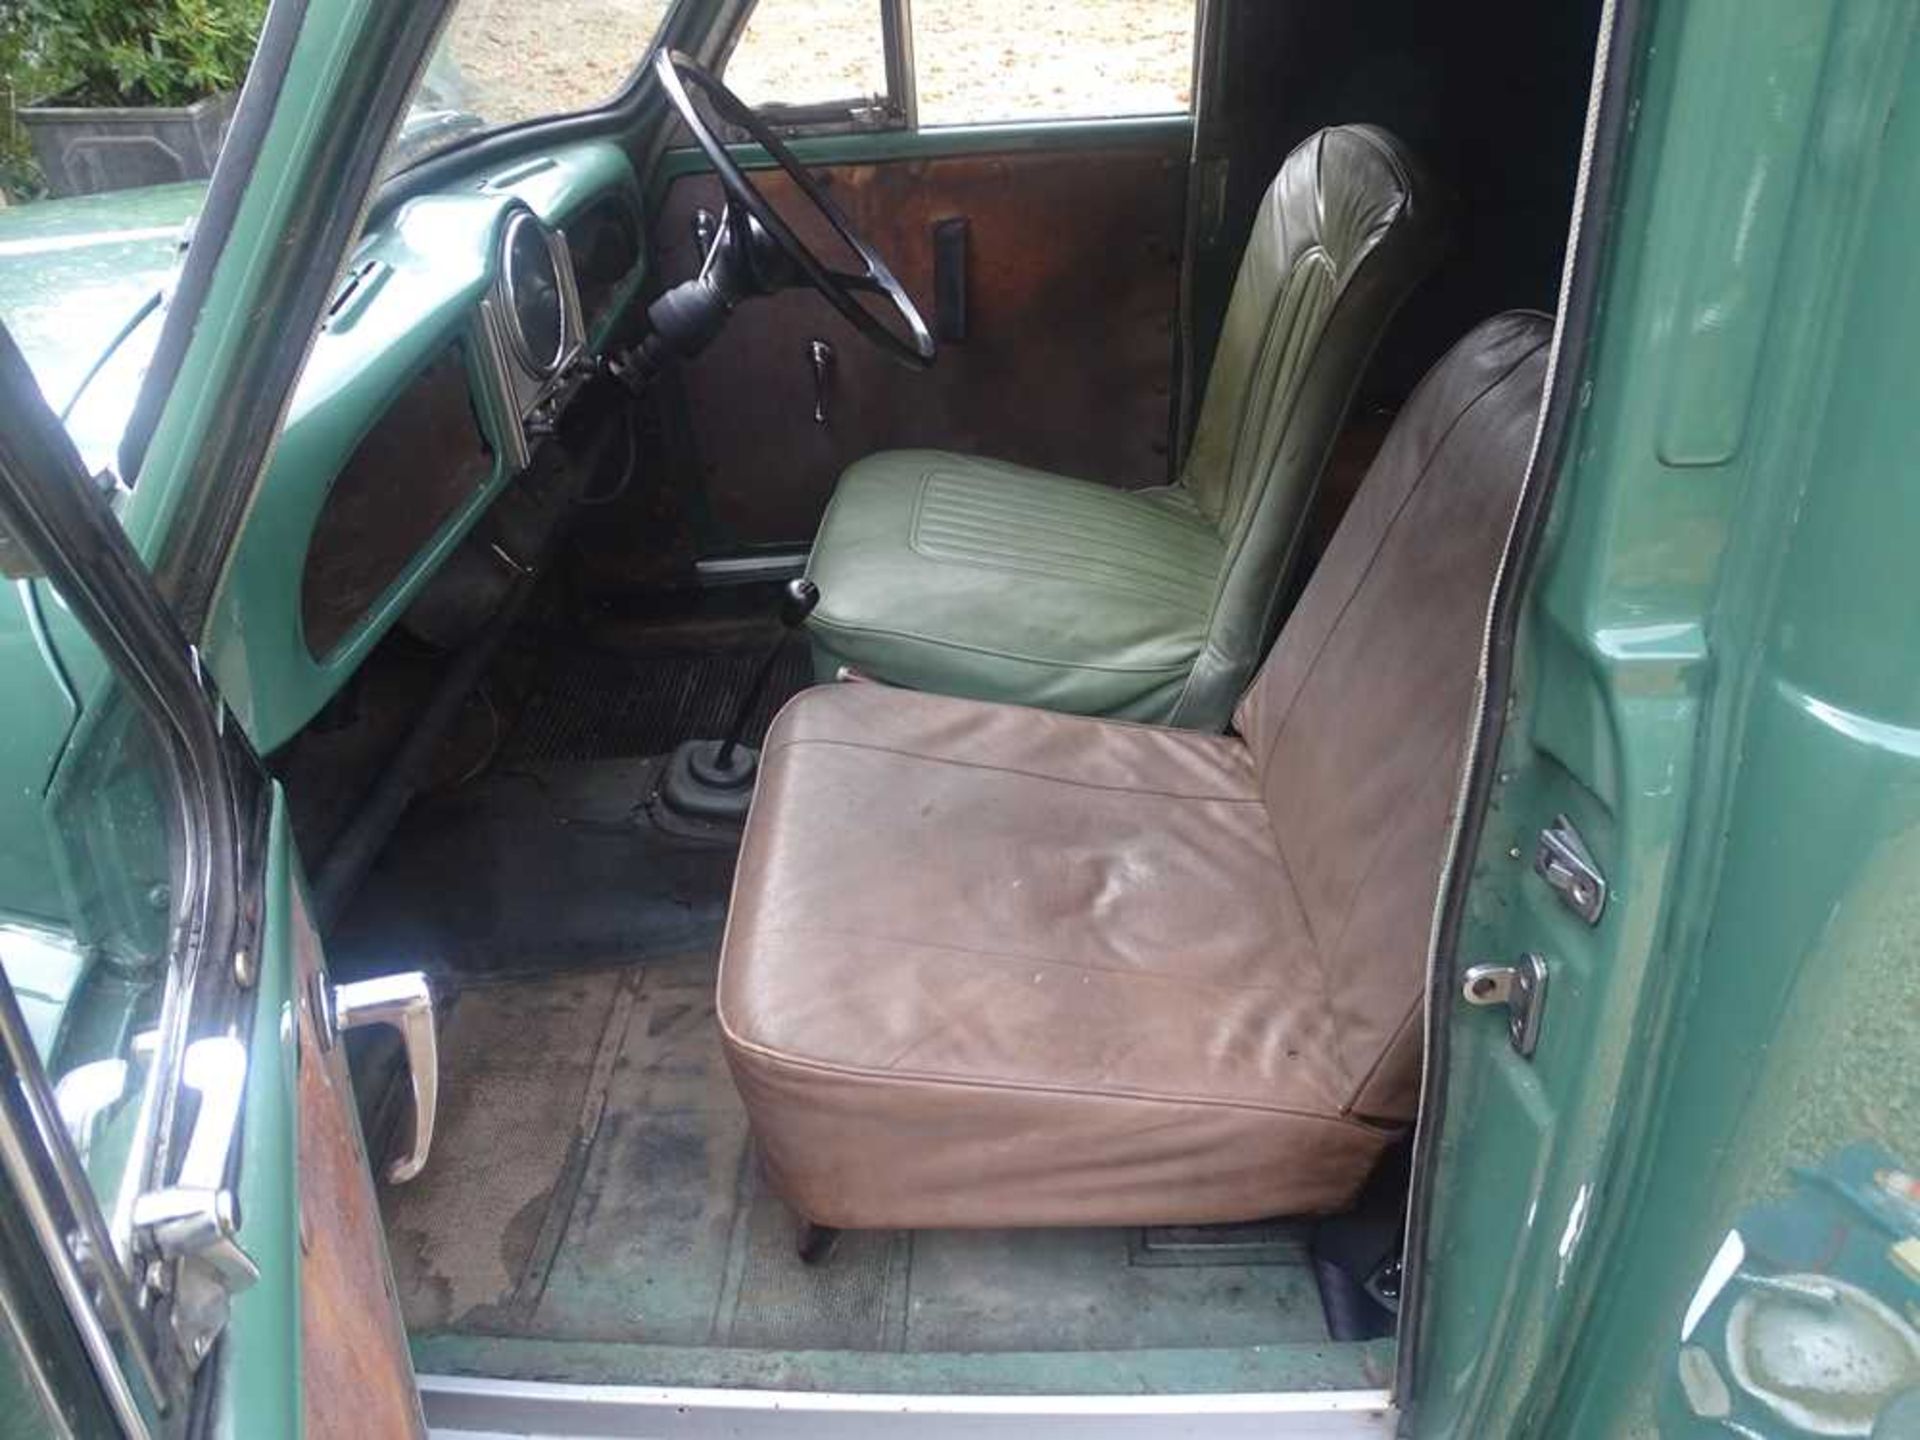 1970 Austin 6 CWT Van Single Family Ownership From New - Image 31 of 45